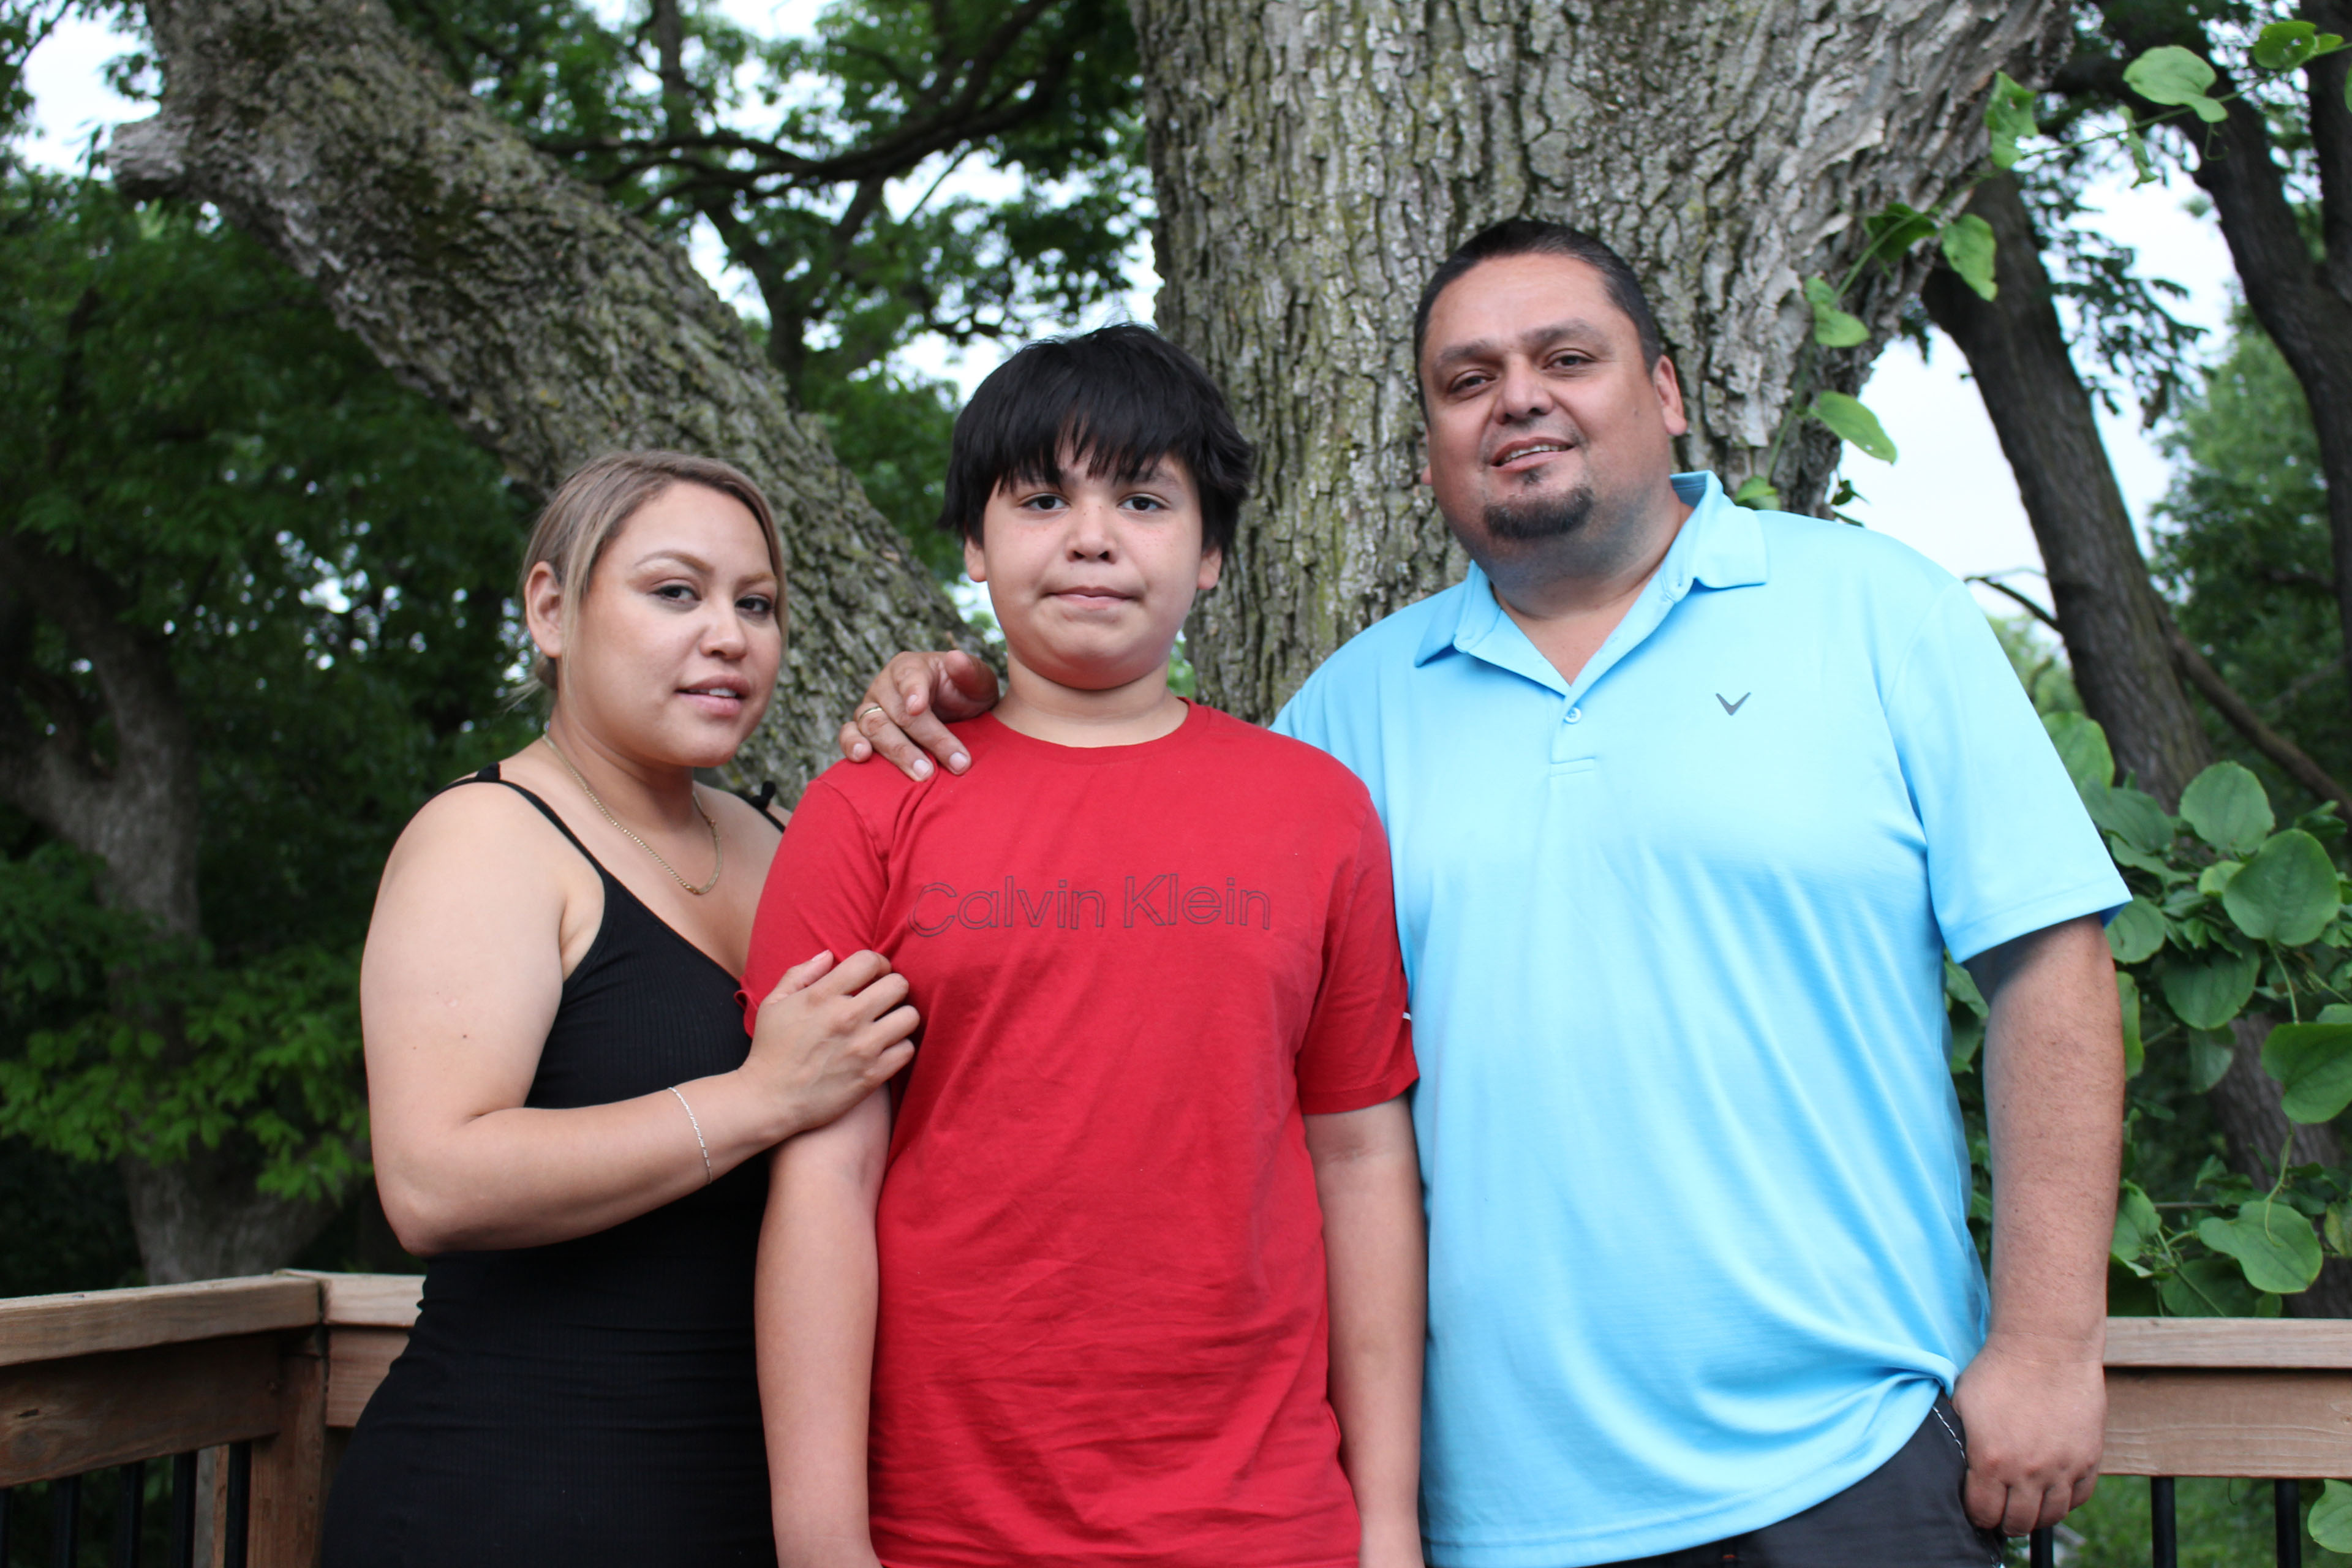 Samuel Arellano, a young boy, (center) stands with his parents, Abigail (left) and Antonio (right), outside their home in Kansas City, Kansas.